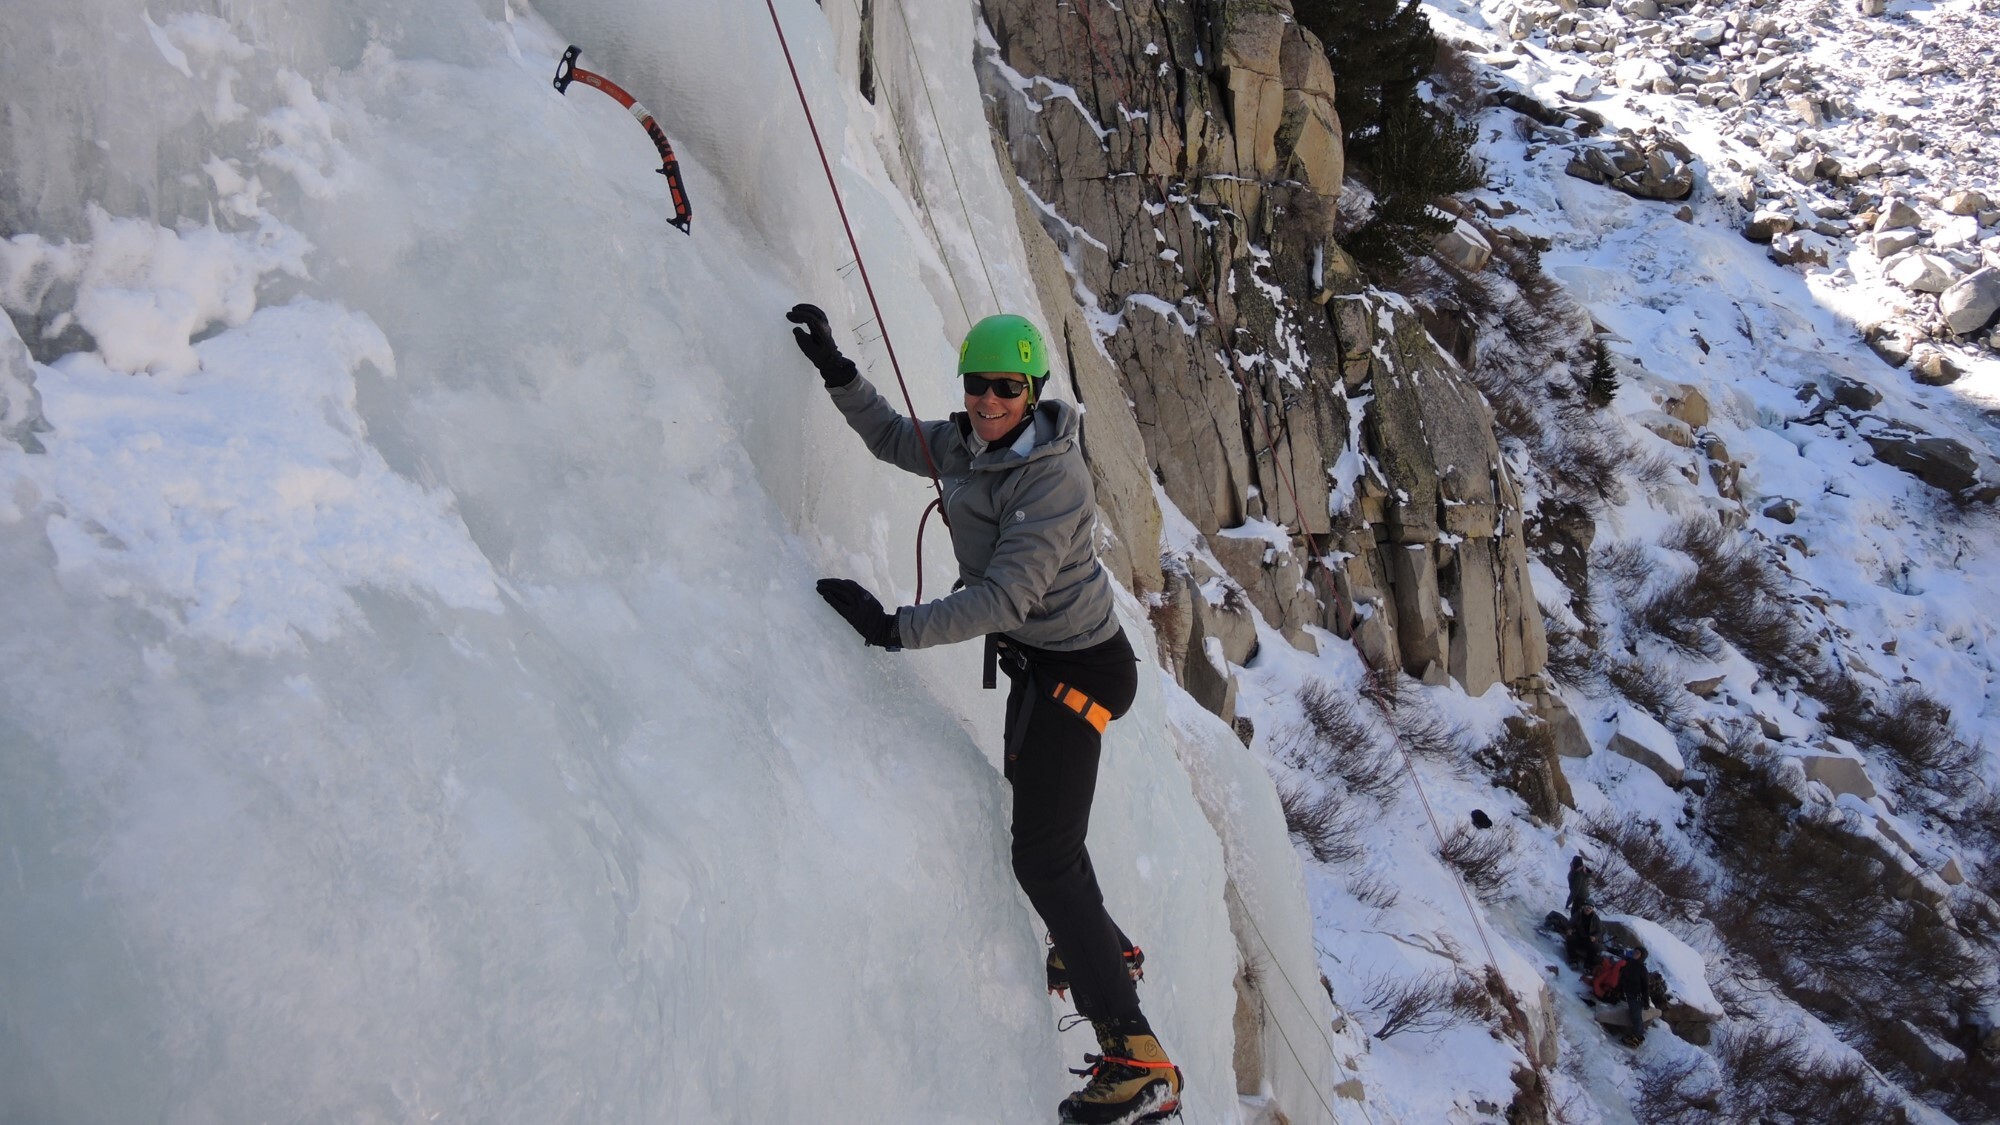 Annmarie Eldering is suspended by rope on a rocky cliffside that is completely covered in a thick layer of ice. She smiles brightly at the camera, dressed in warm gear. 